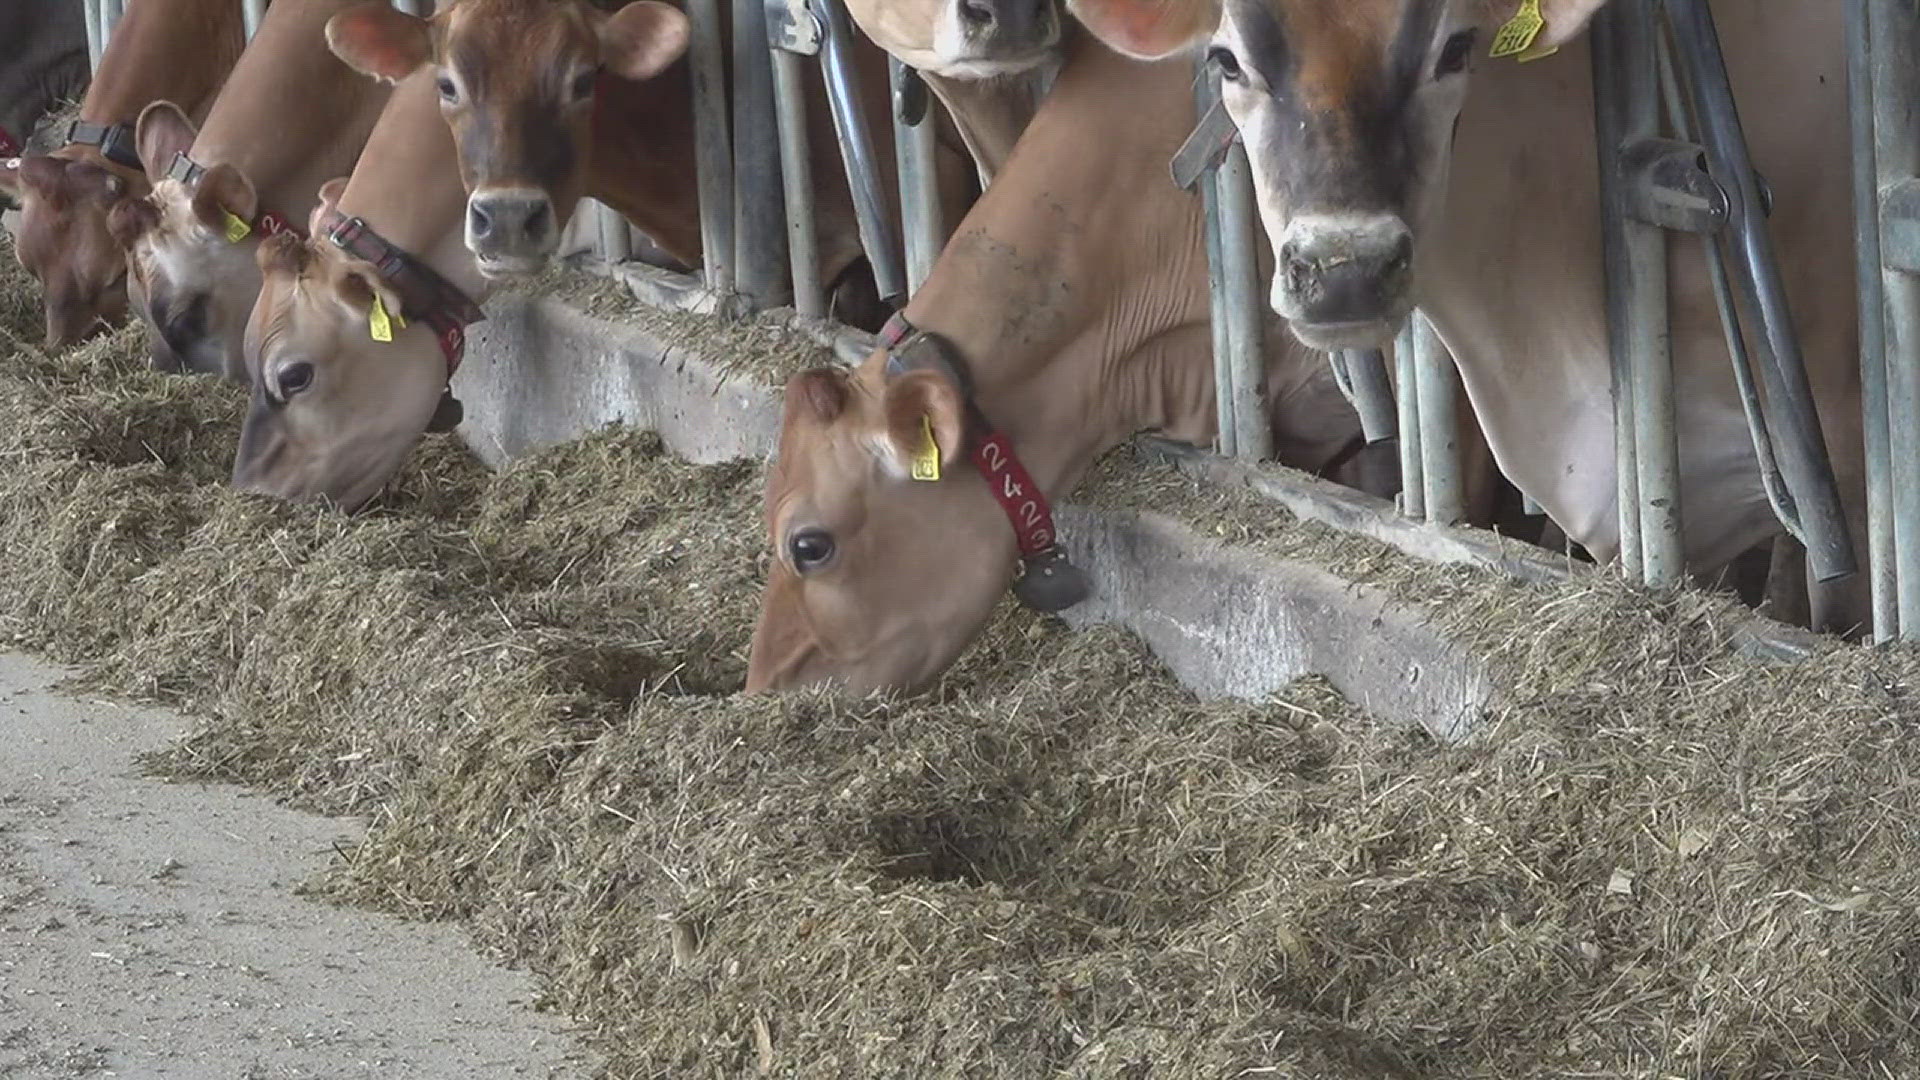 Lactating dairy cows entered in events like the Mississippi Valley Fair need to be tested to prevent the spread of the virus.